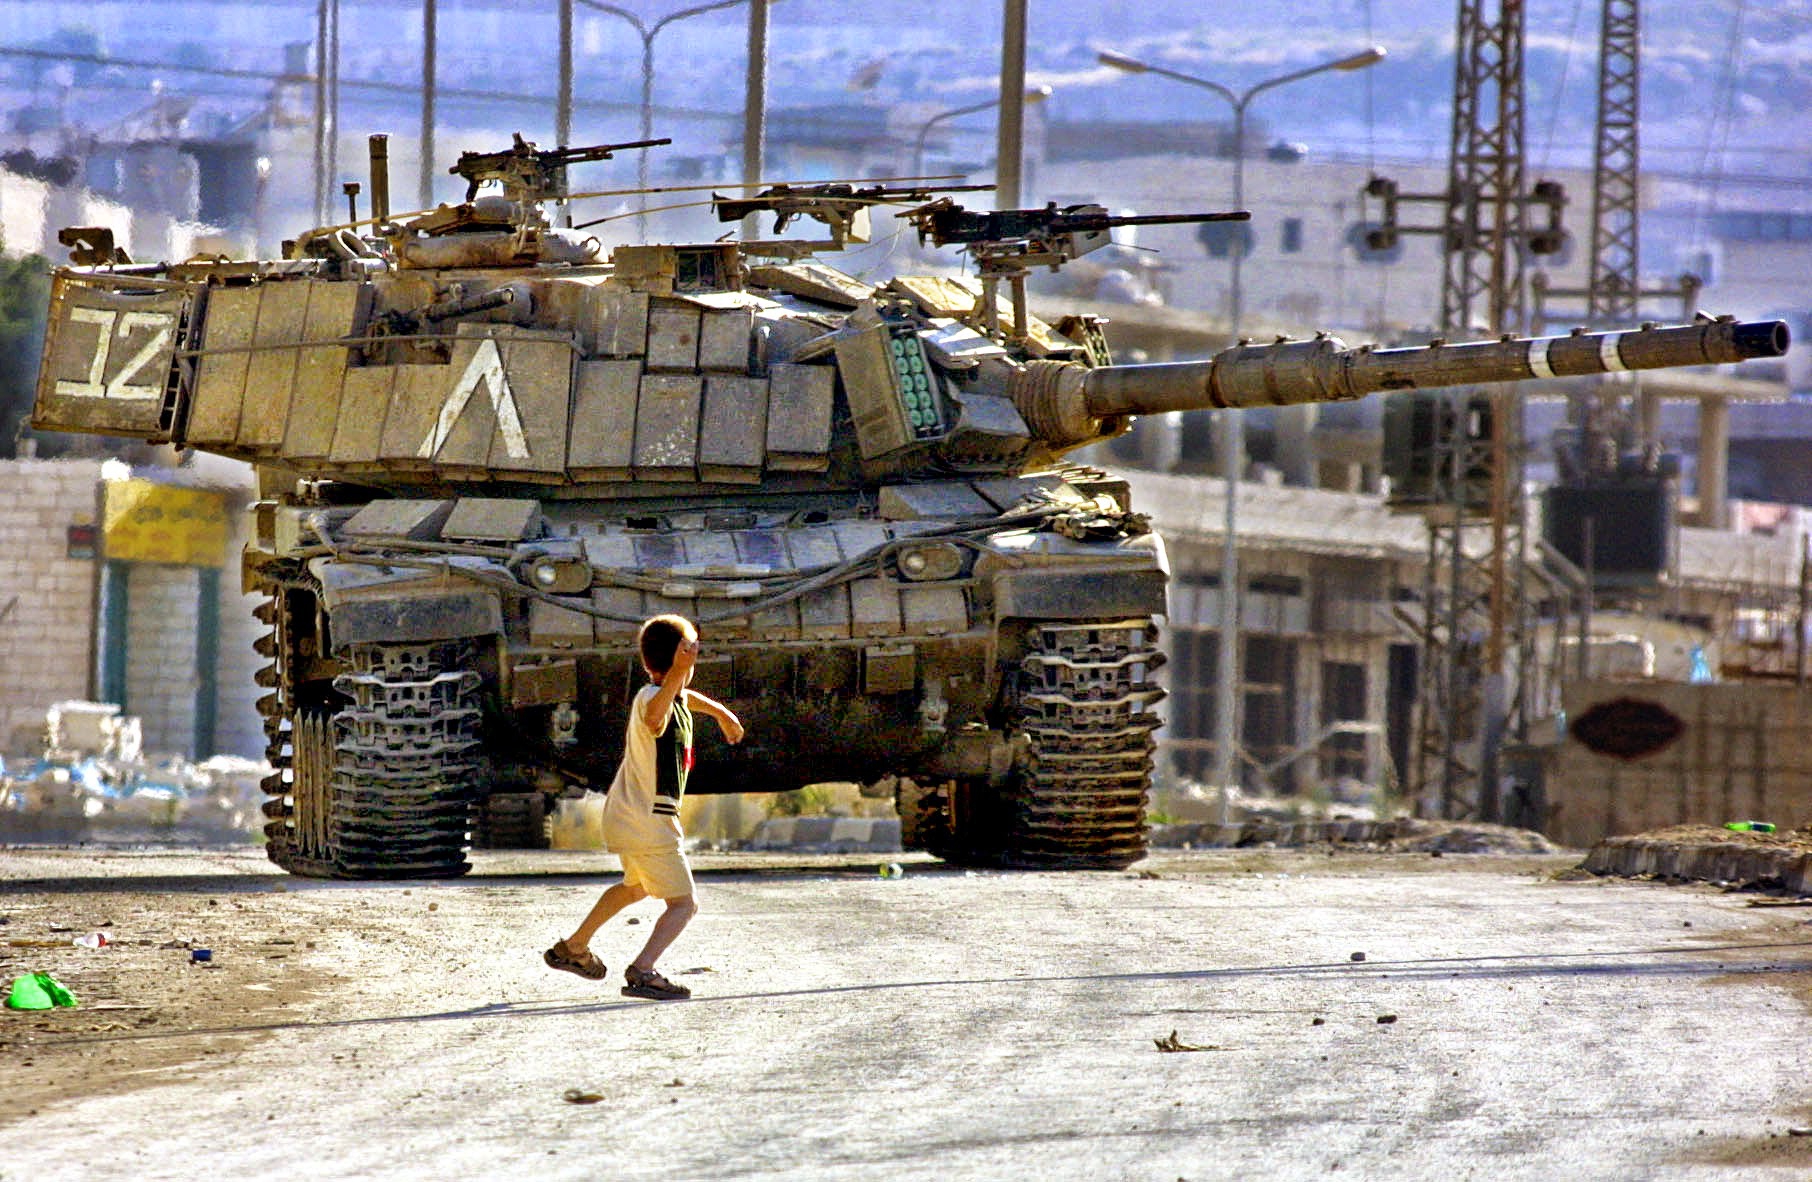 Palestinian+child+trying+to+fight+against+Israeli+tank